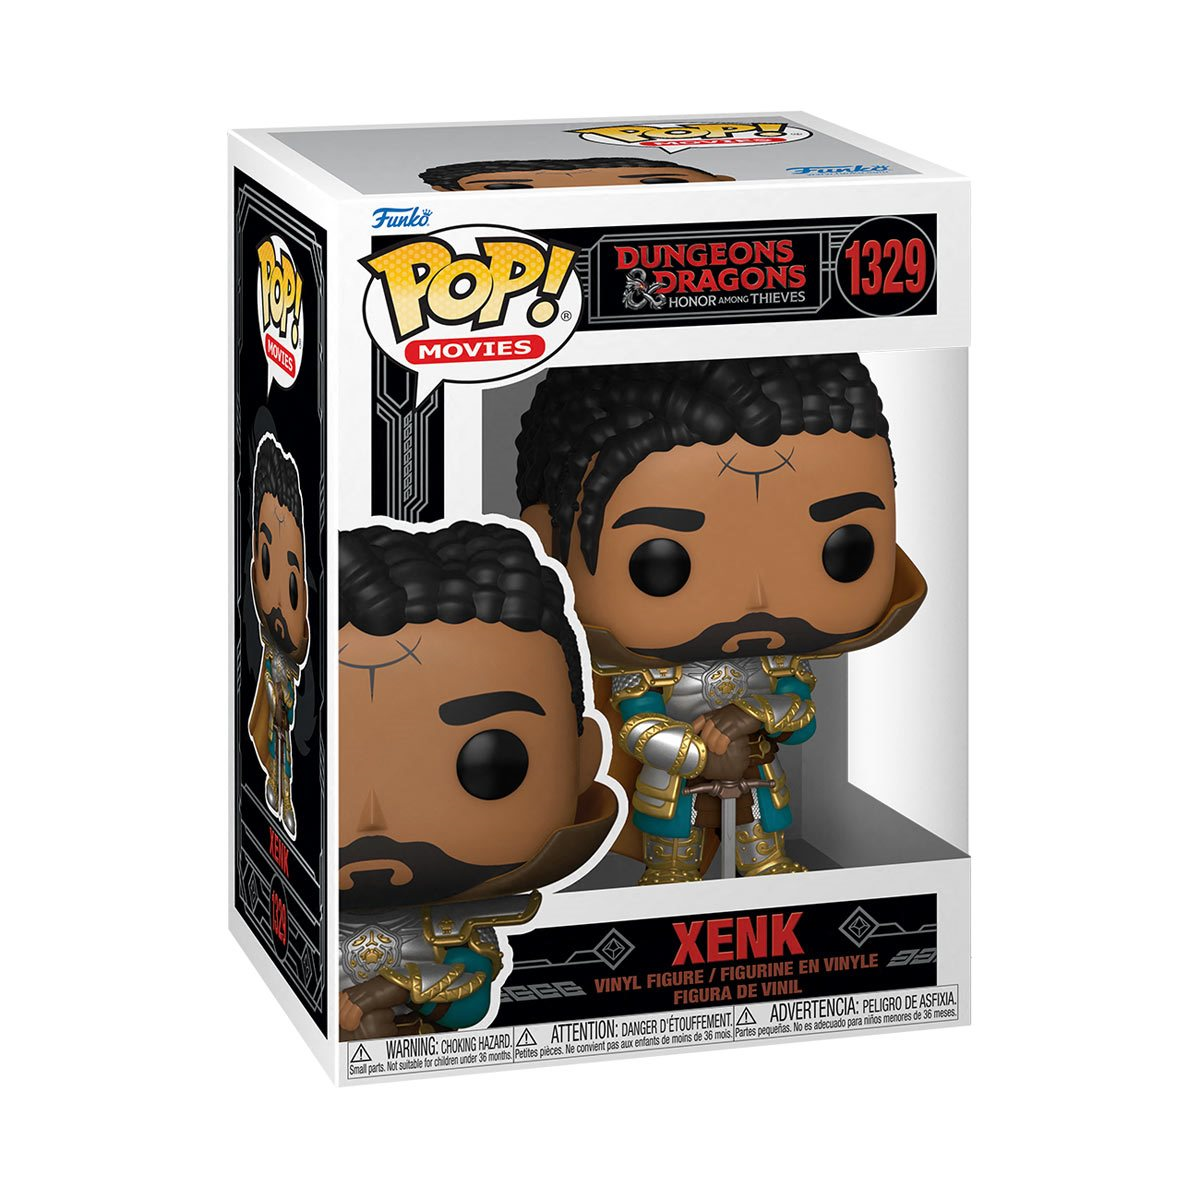 Xenk #1329 - Dungeons & Dragons: Honor Among Thieves - Funko Pop! Vinyl Figure